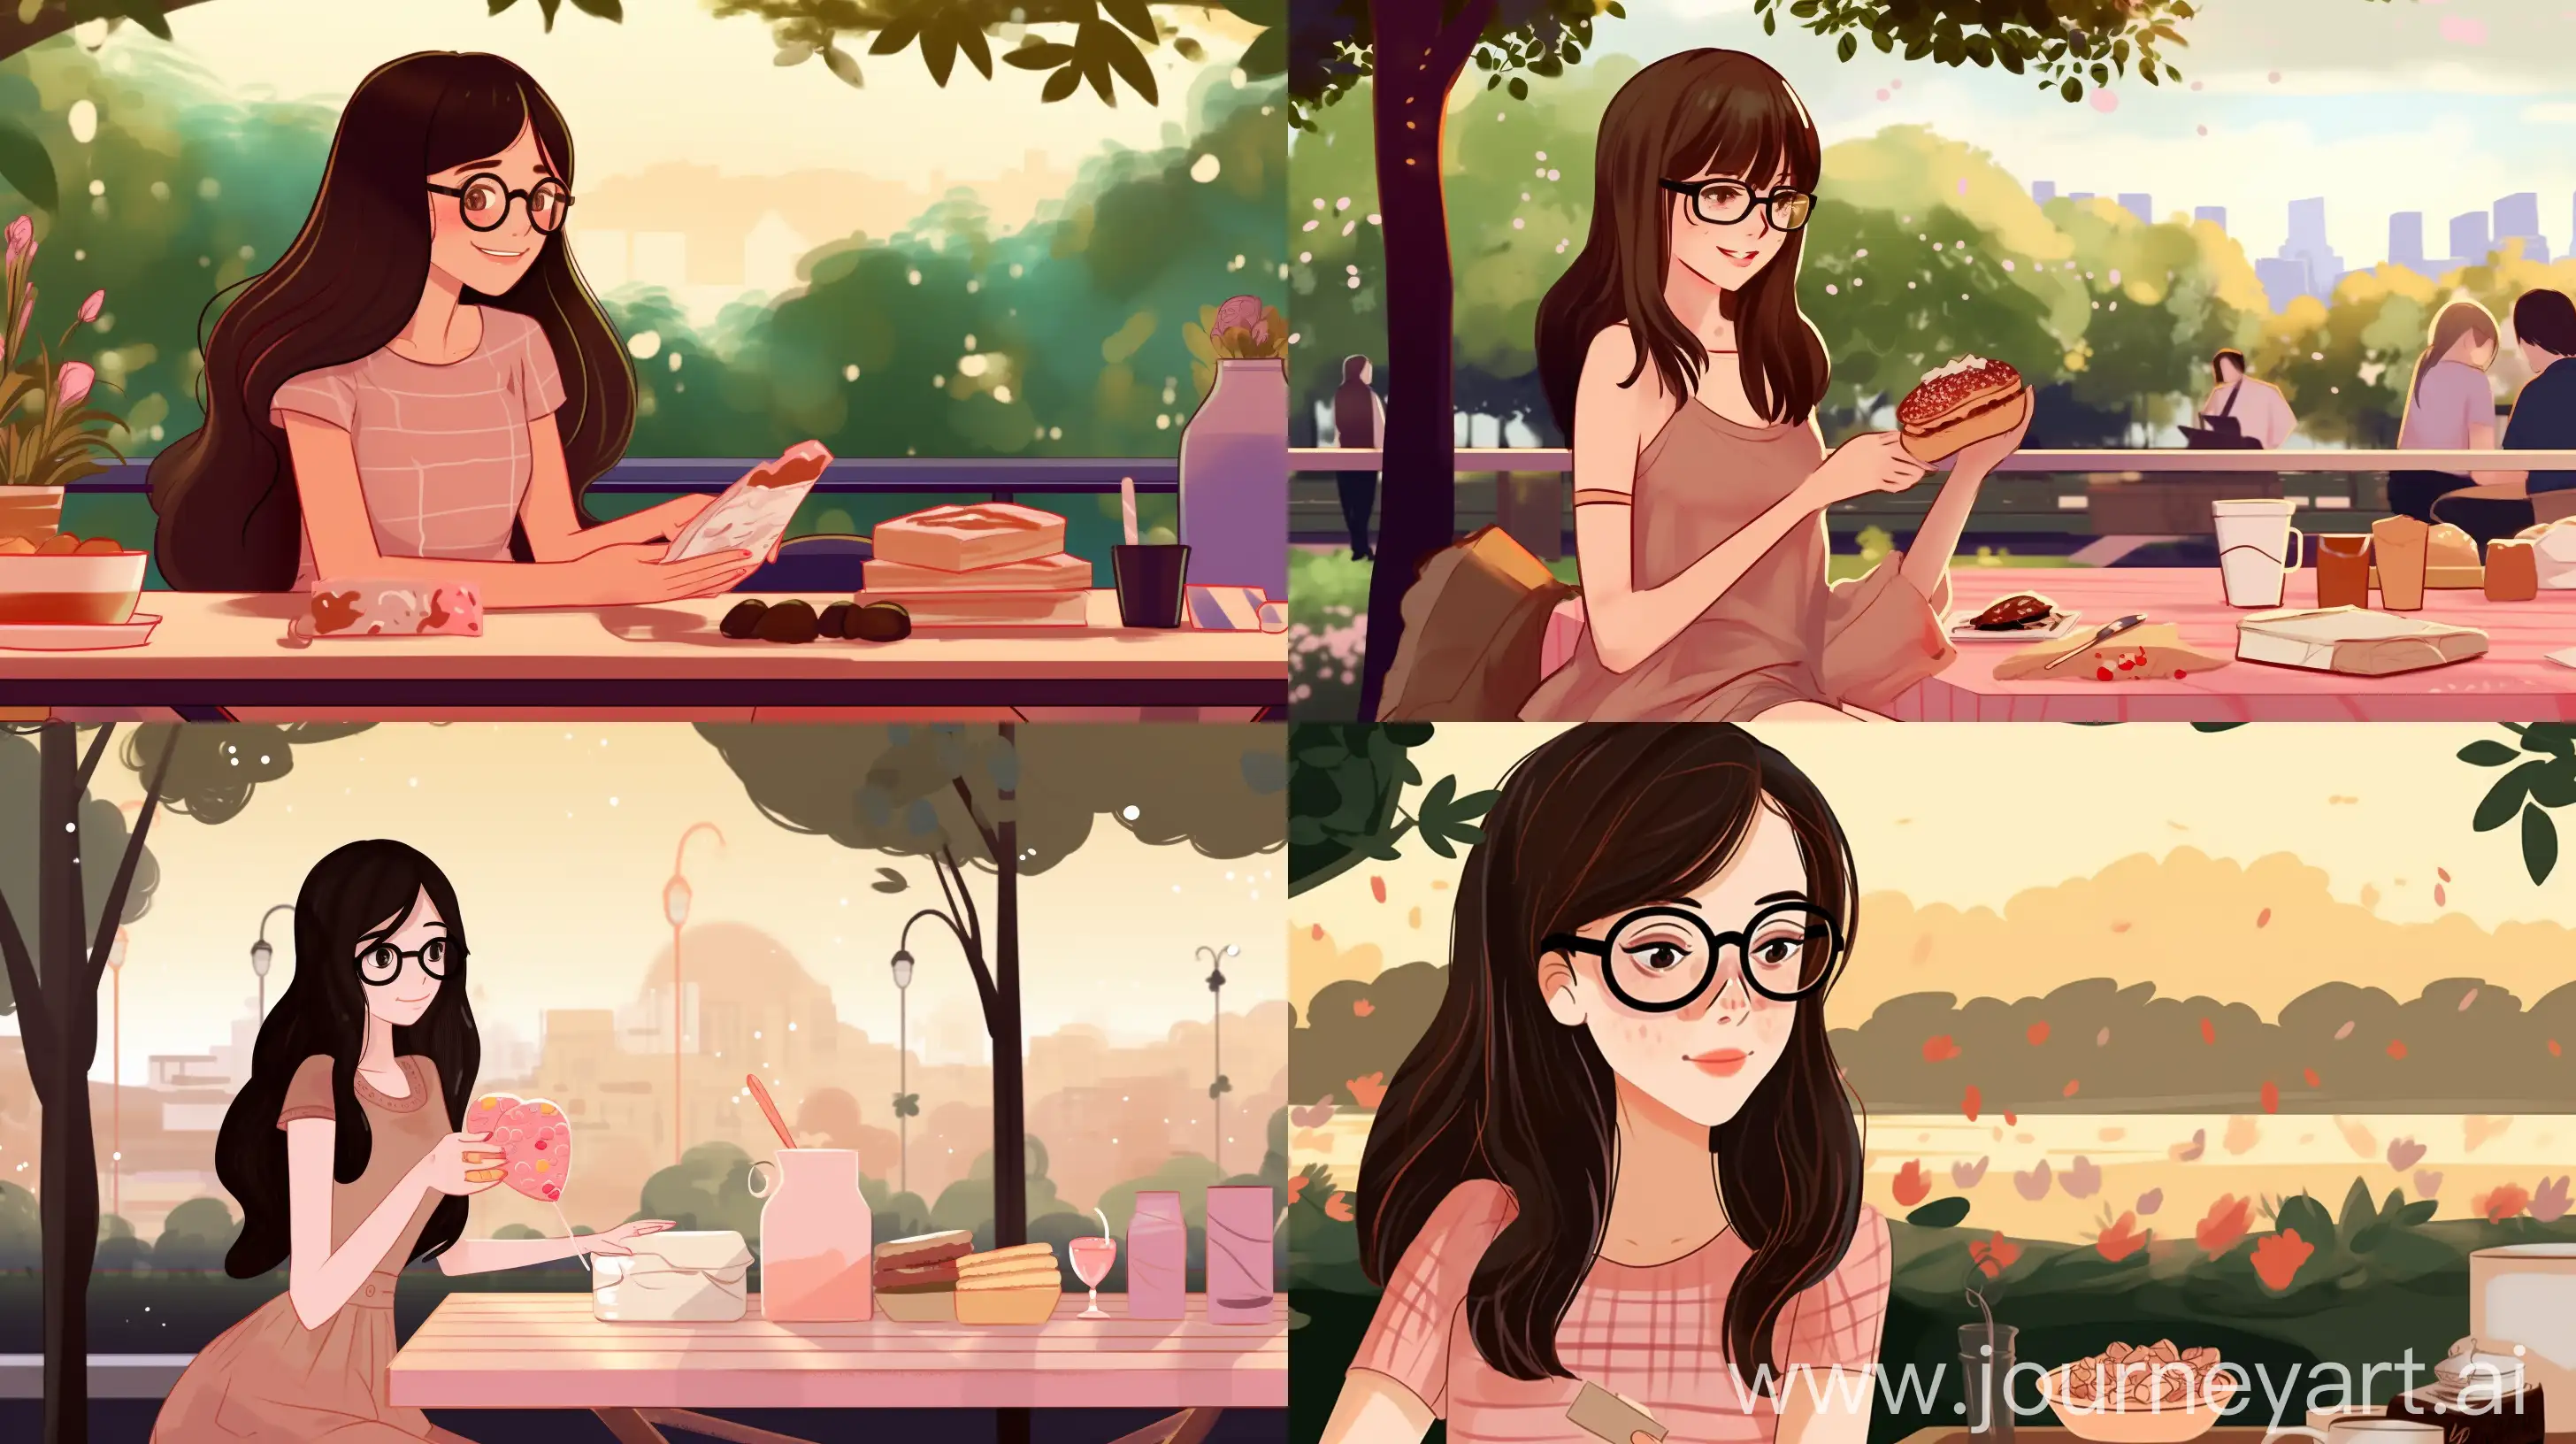 Cheerful-Girl-in-Urban-Park-Vibrant-City-Life-and-Delightful-Pink-Attire